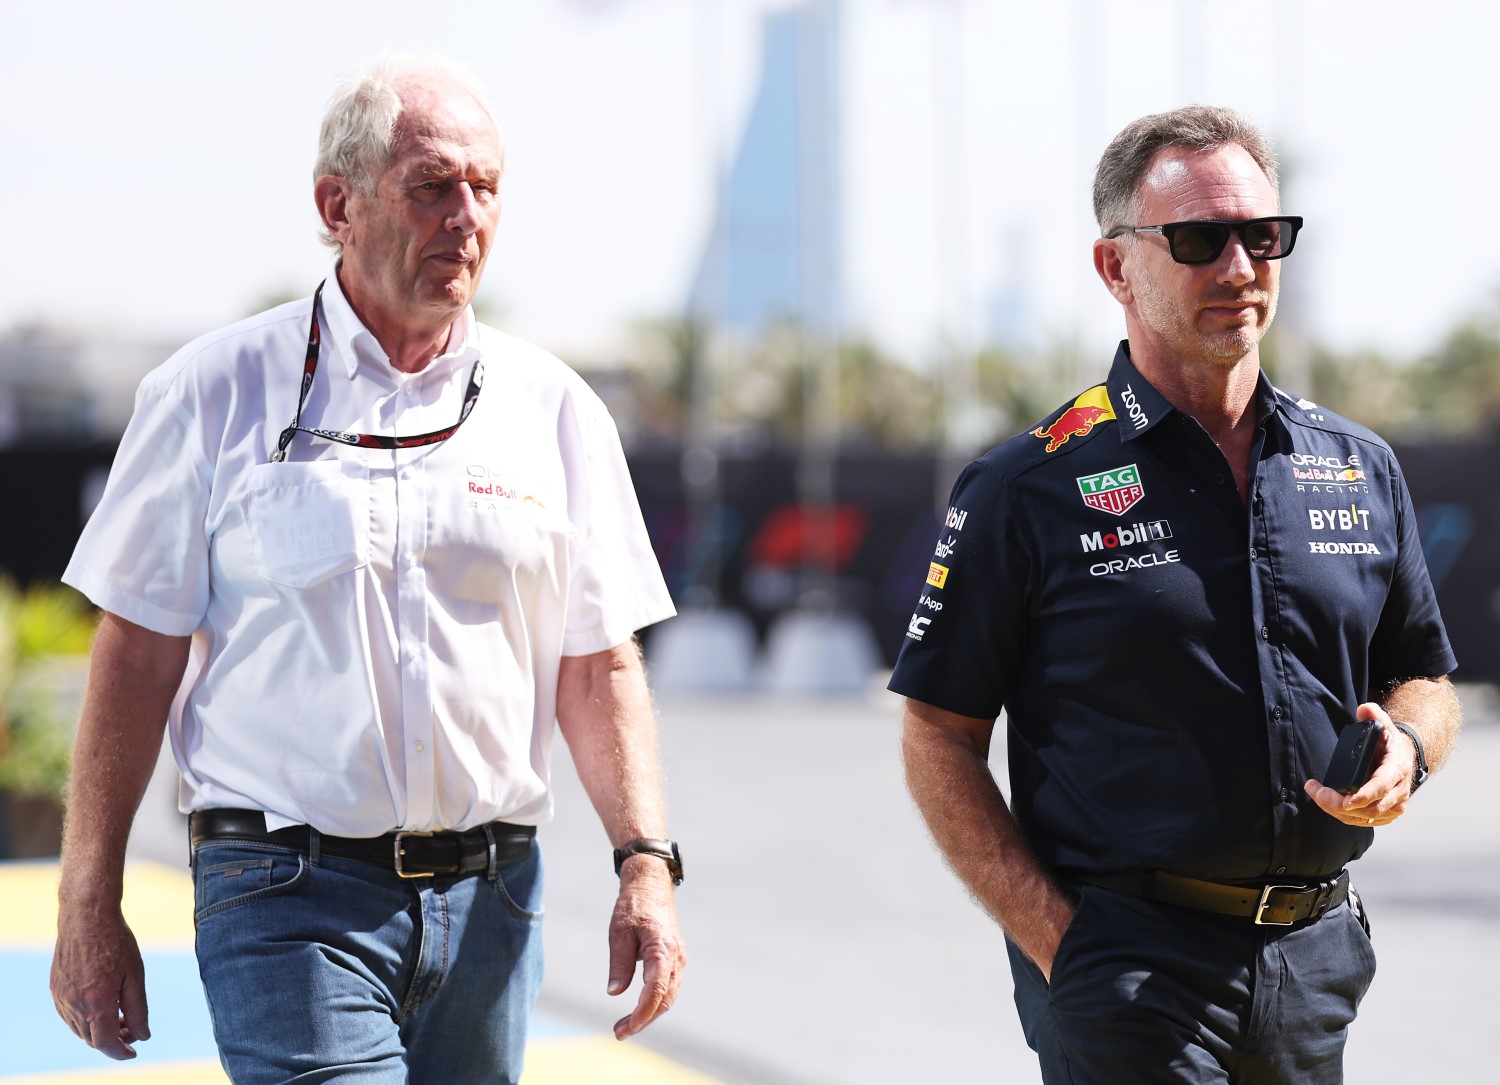 Red Bull Racing Team Consultant Dr Helmut Marko and Red Bull Racing Team Principal Christian Horner walk in the Paddock prior to final practice ahead of the F1 Grand Prix of Saudi Arabia at Jeddah Corniche Circuit on March 18, 2023 in Jeddah, Saudi Arabia. (Photo by Lars Baron/Getty Images) // Getty Images / Red Bull Content Pool